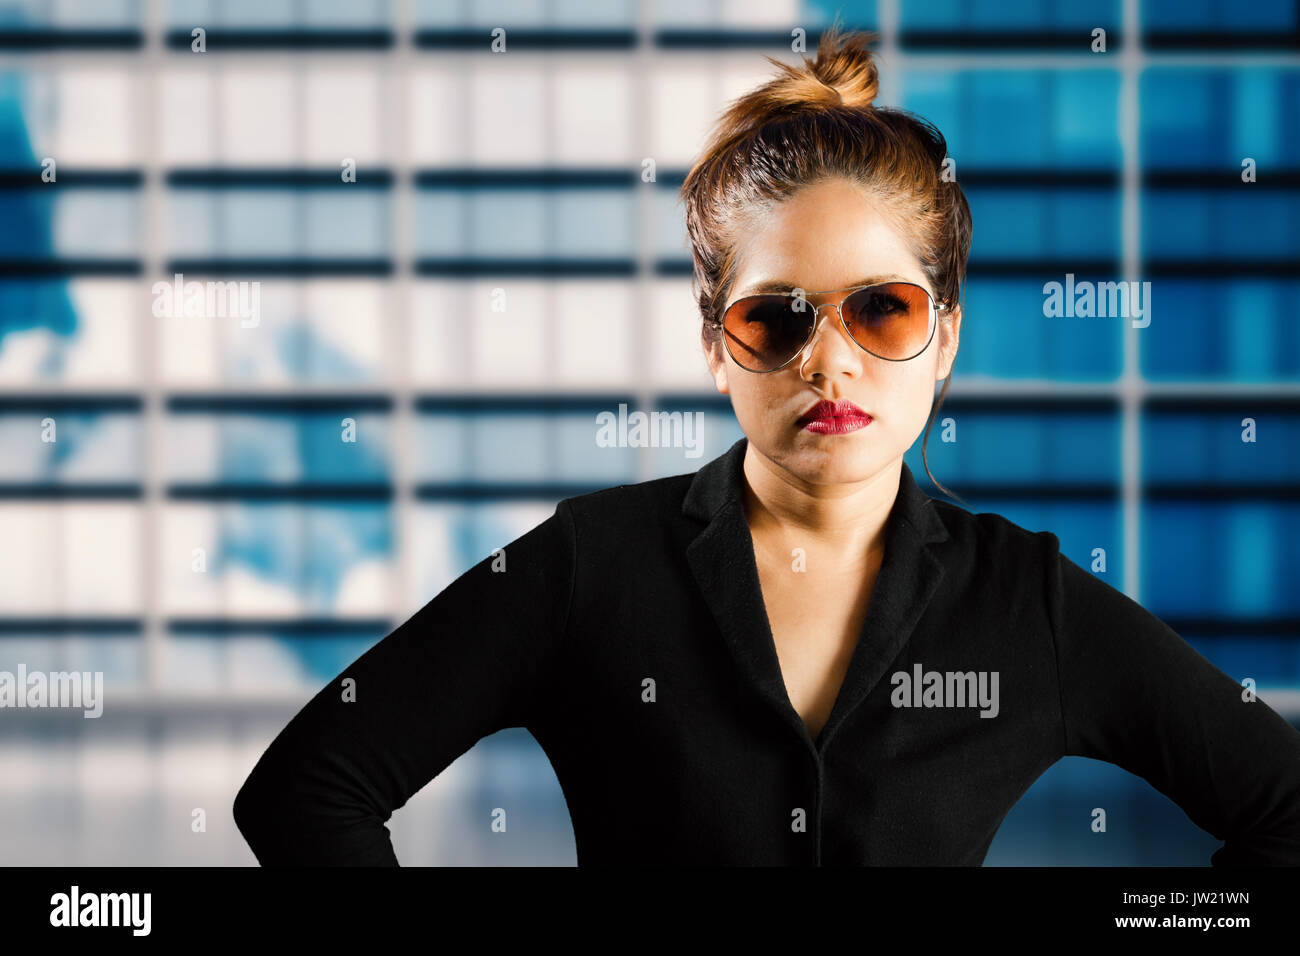 businesswoman wearing sunglasses and red lips with building background Stock Photo